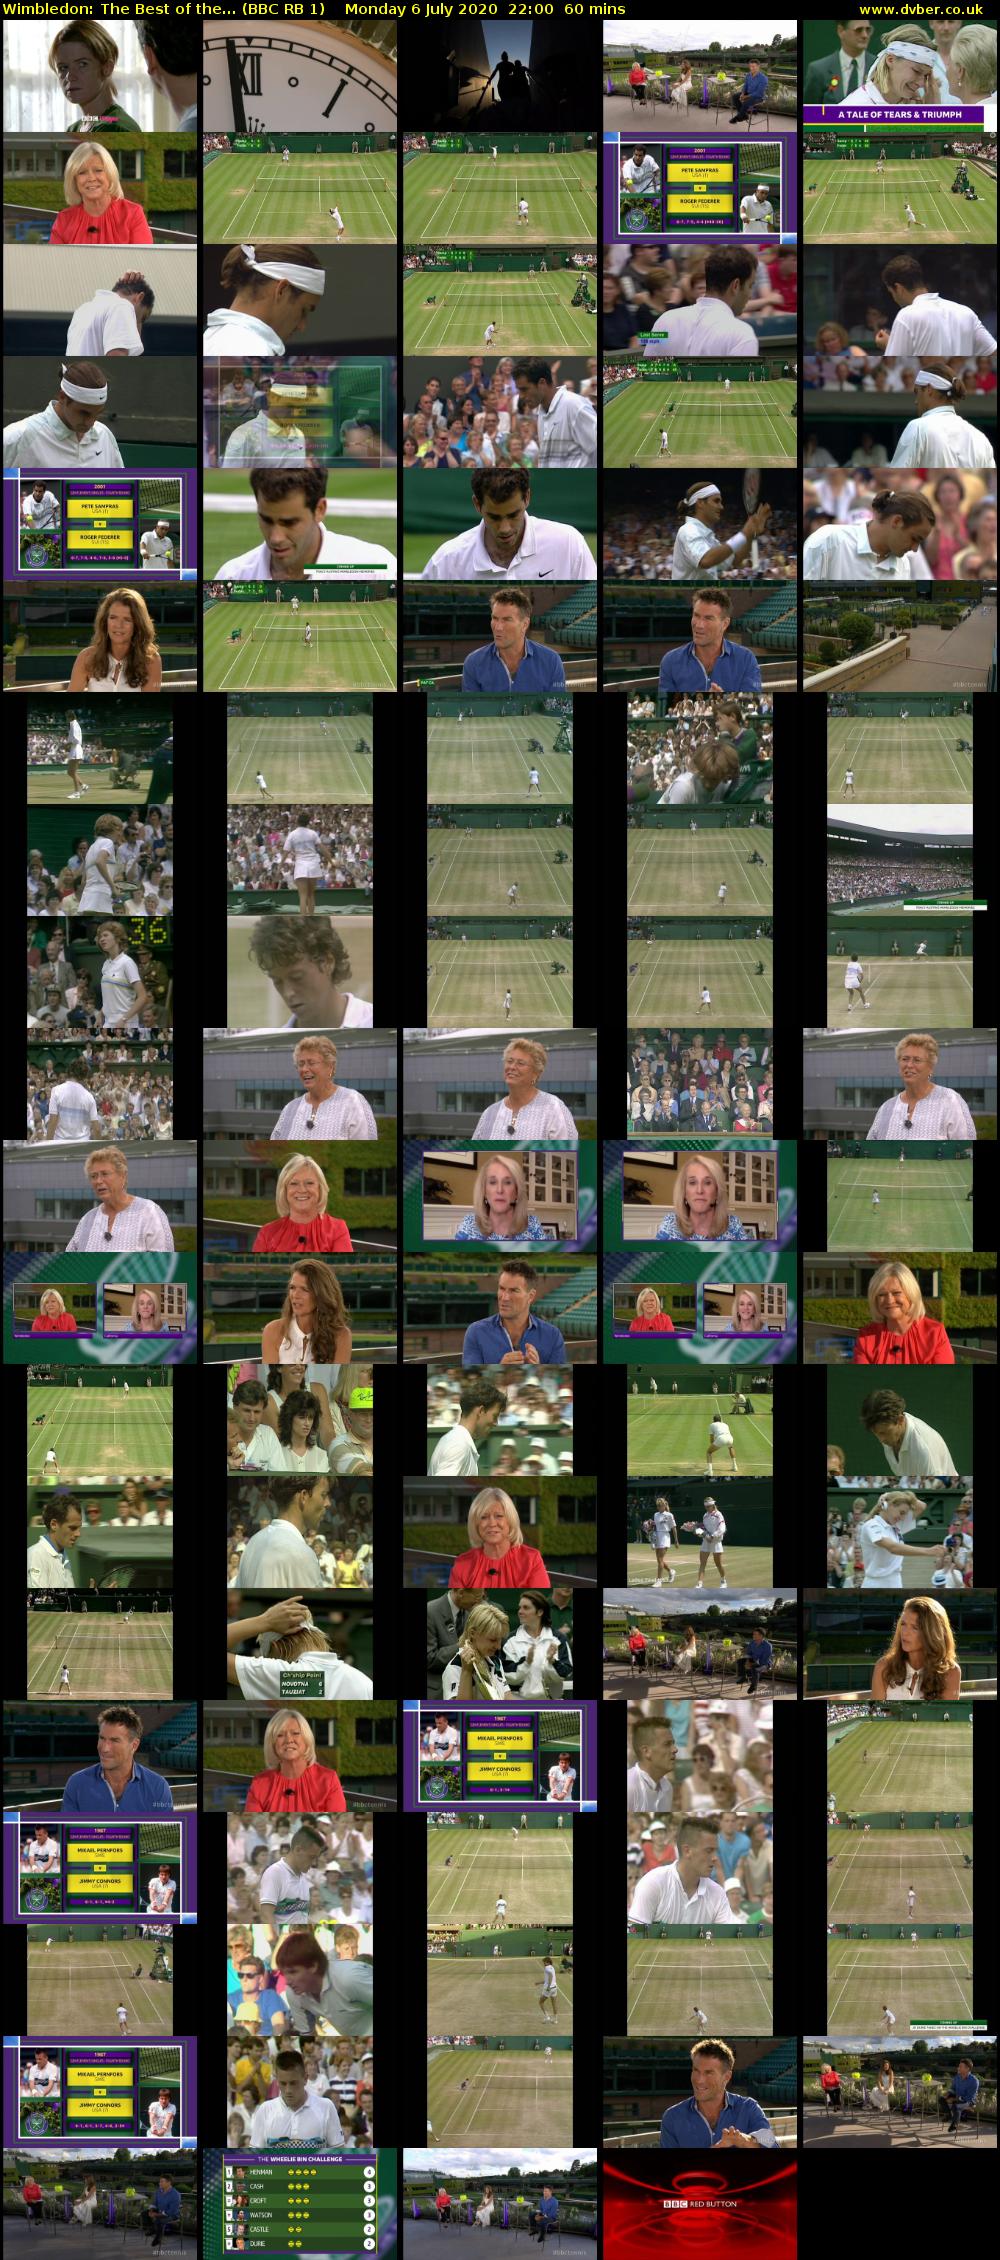 Wimbledon: The Best of the... (BBC RB 1) Monday 6 July 2020 22:00 - 23:00